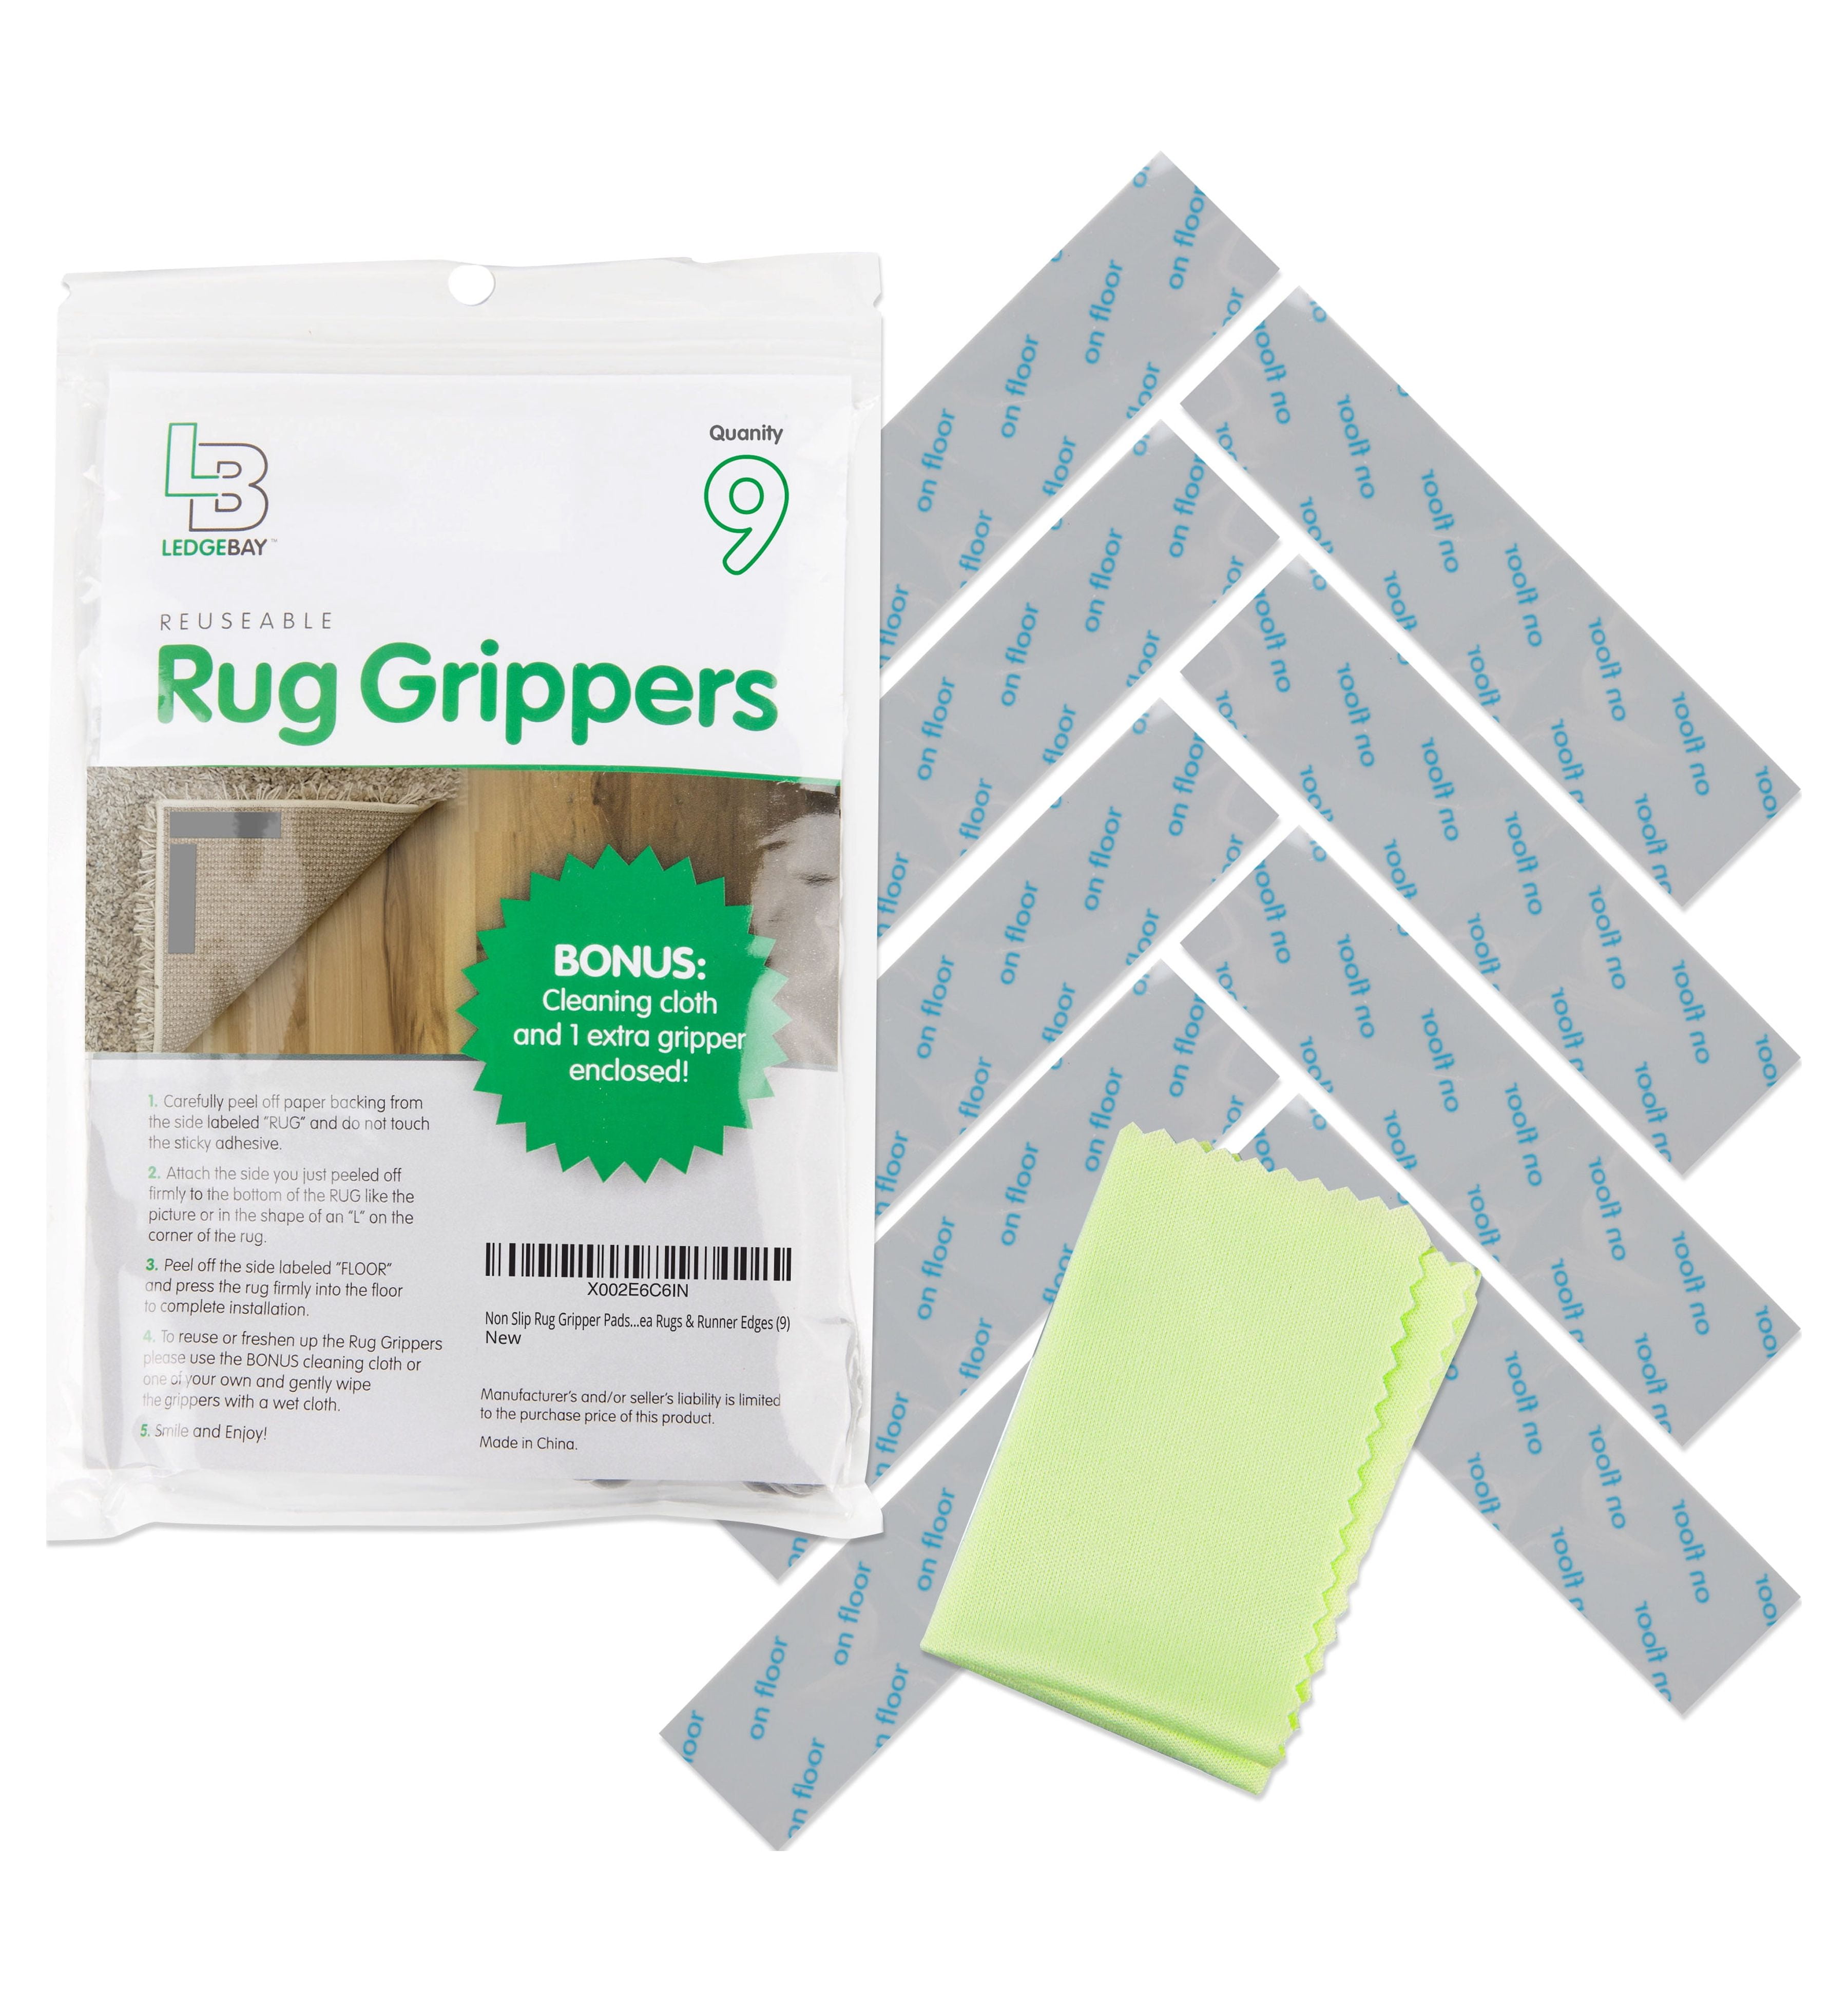 X-Protector Rug Grippers New 8 Pcs Anti Curling Rug Gripper - Rug Pad - Keeps Your Rug in Place & Corners Flat - Carpet Gripper Renewable Gripper Tape